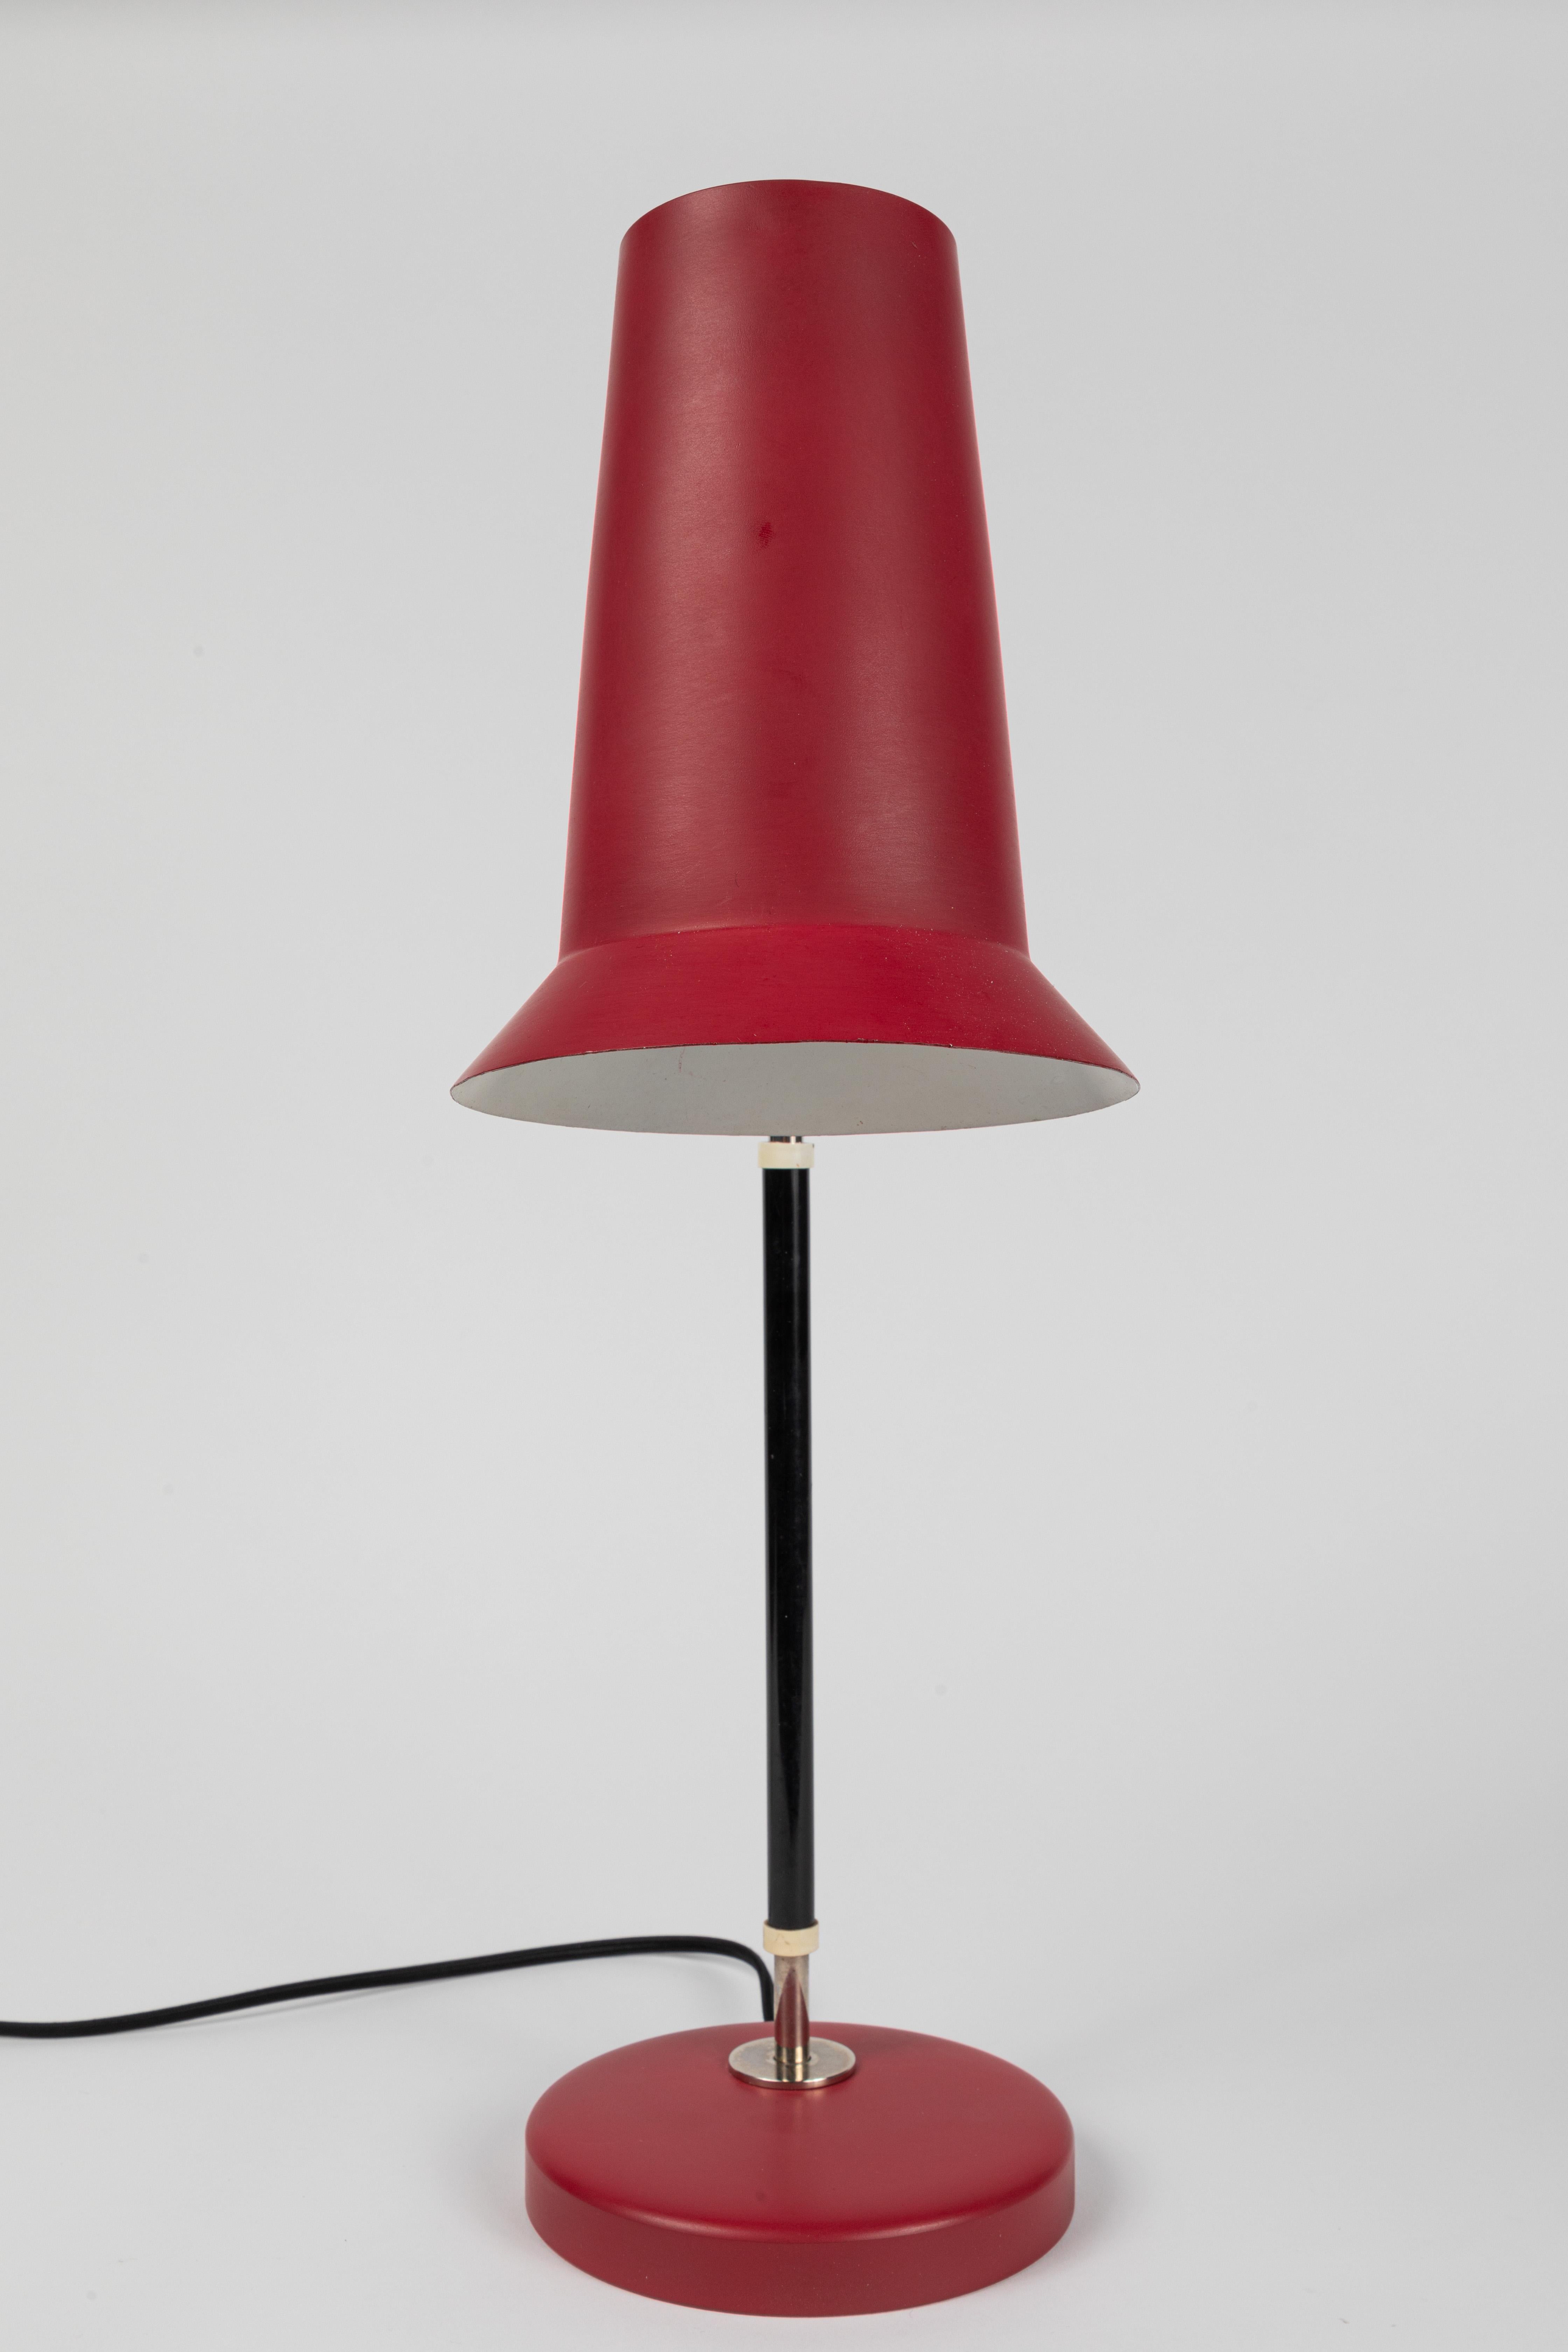 Mid-20th Century Pair of 1960s Yki Nummi Series 40-040 Red Table Lamps for Stockmann-Orno For Sale